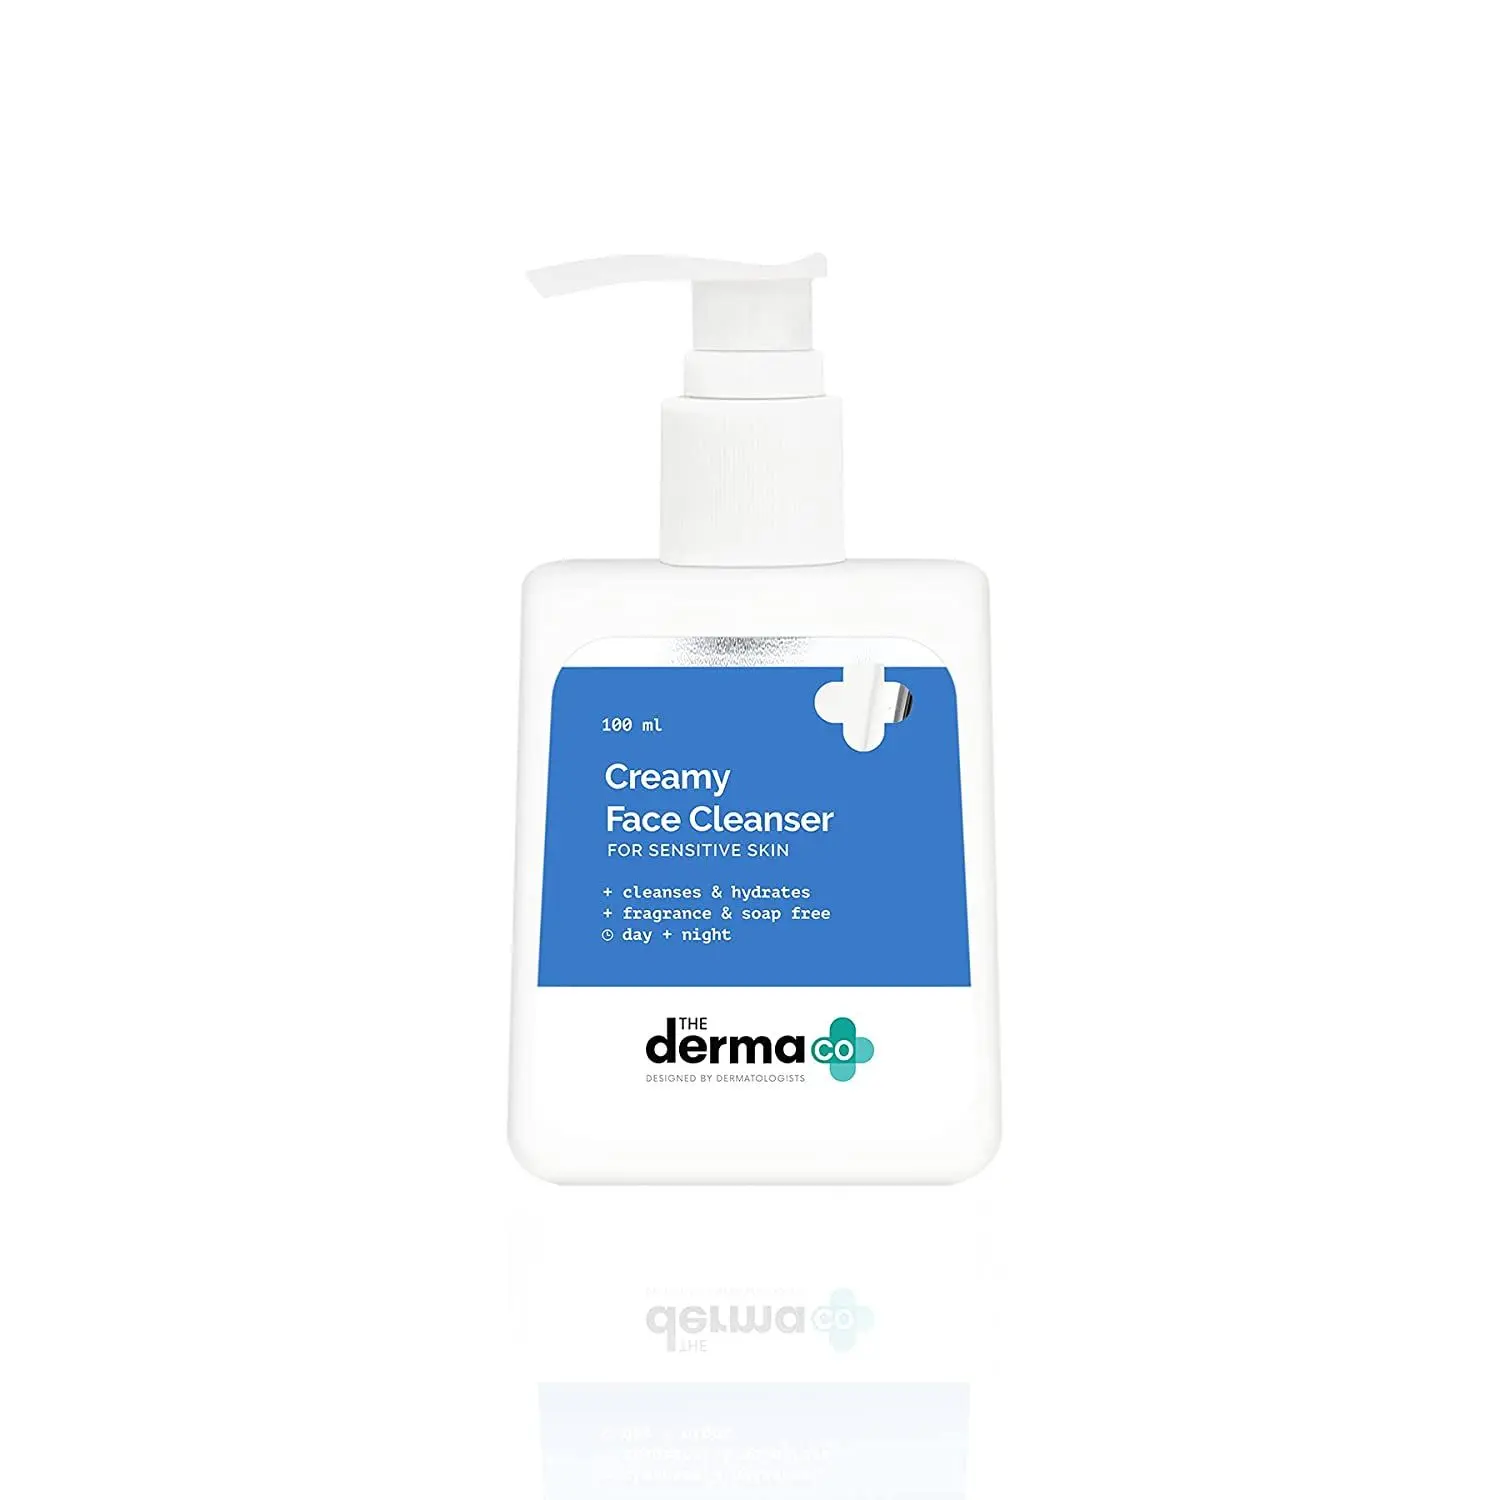 The Derma co. Creamy daily face Cleanser for Sensitive Skin